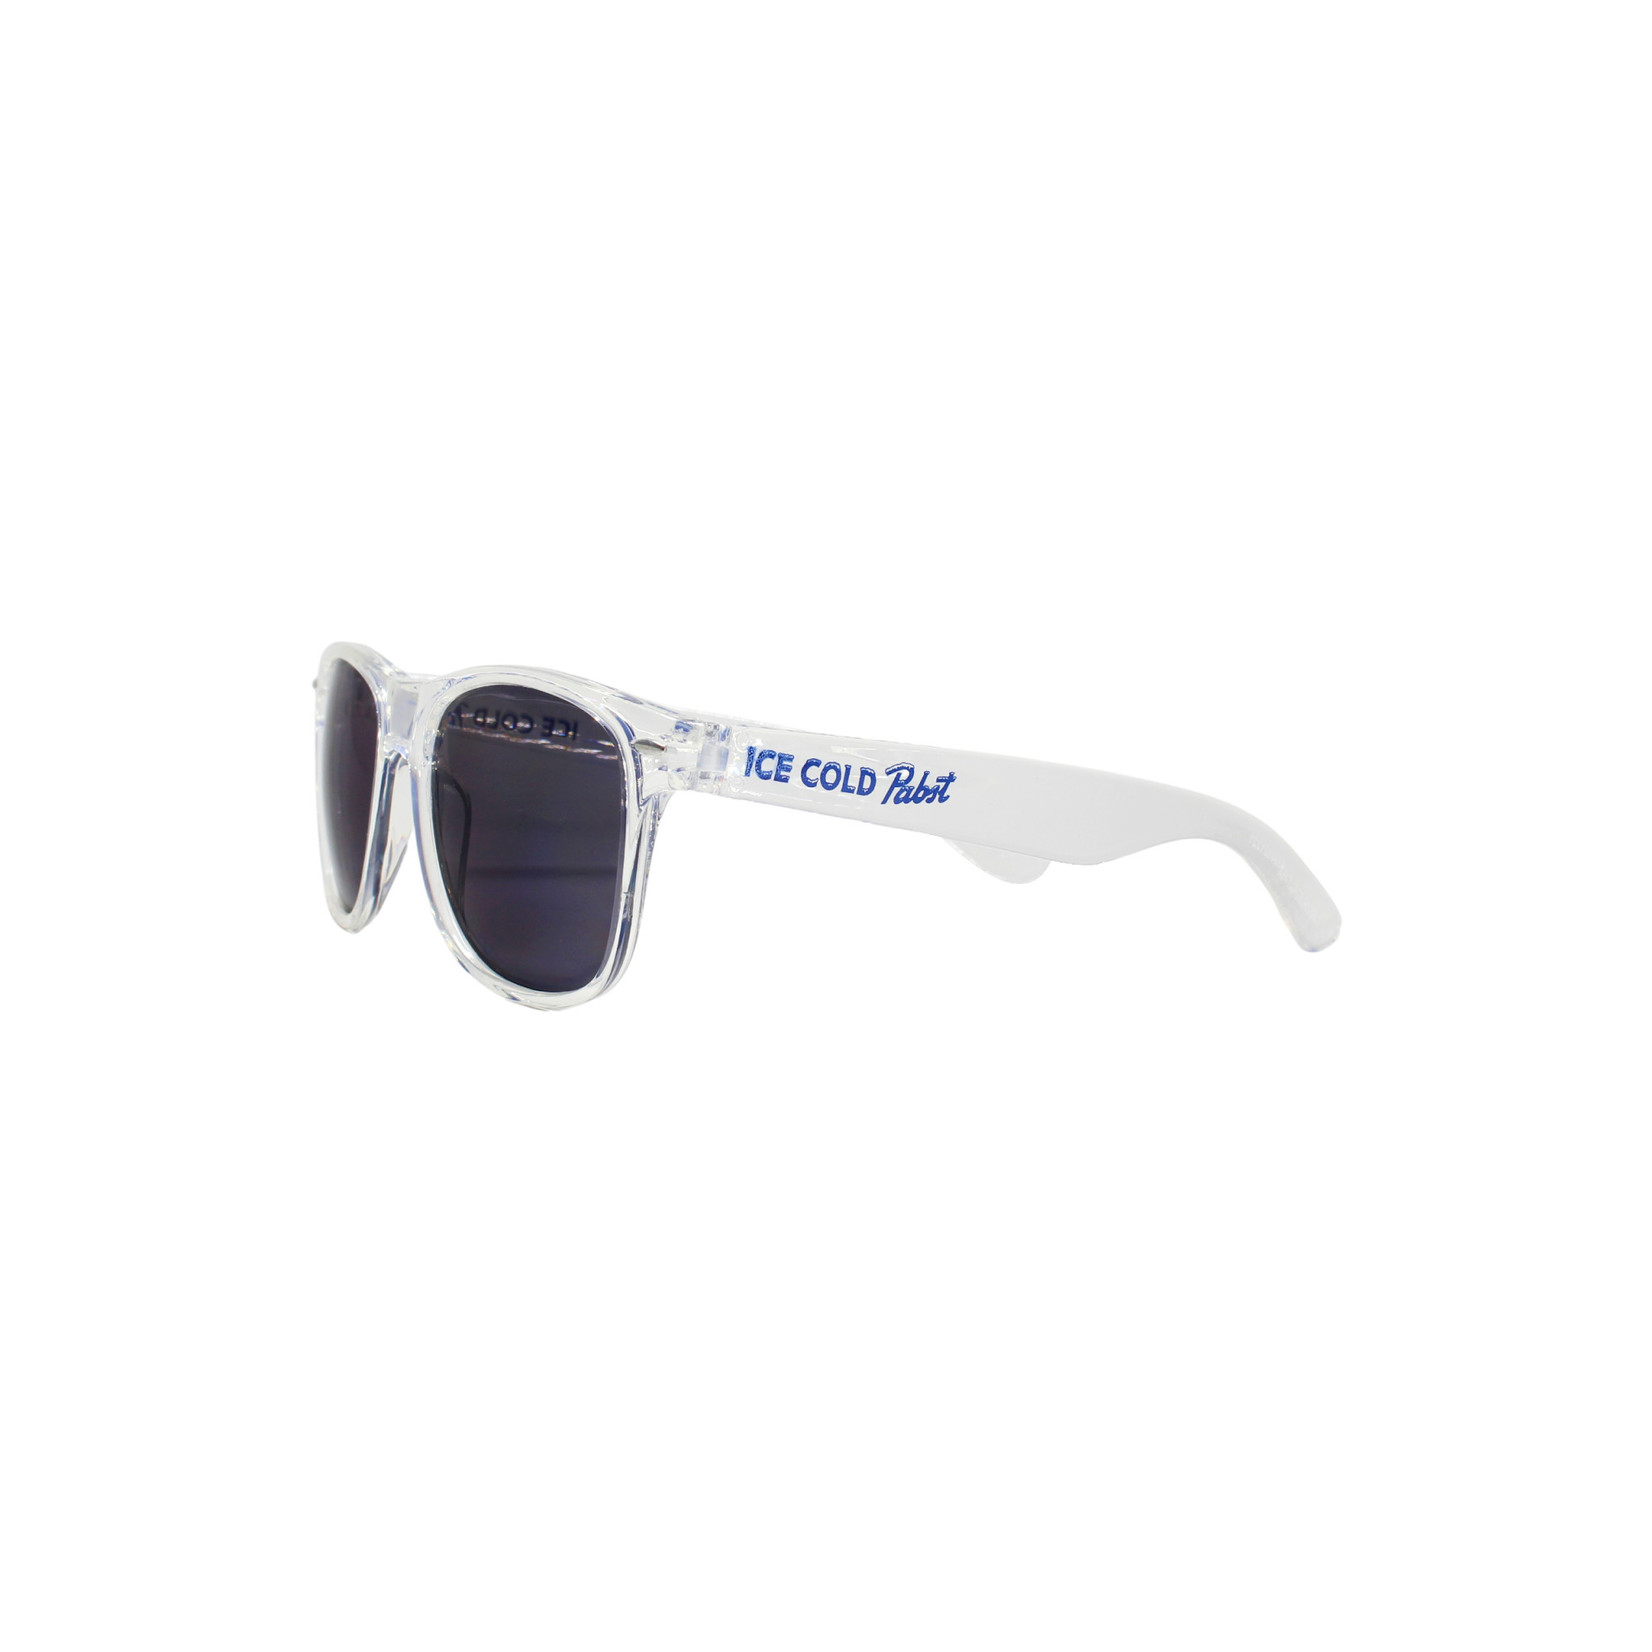 Pabst Pabst Sunglasses